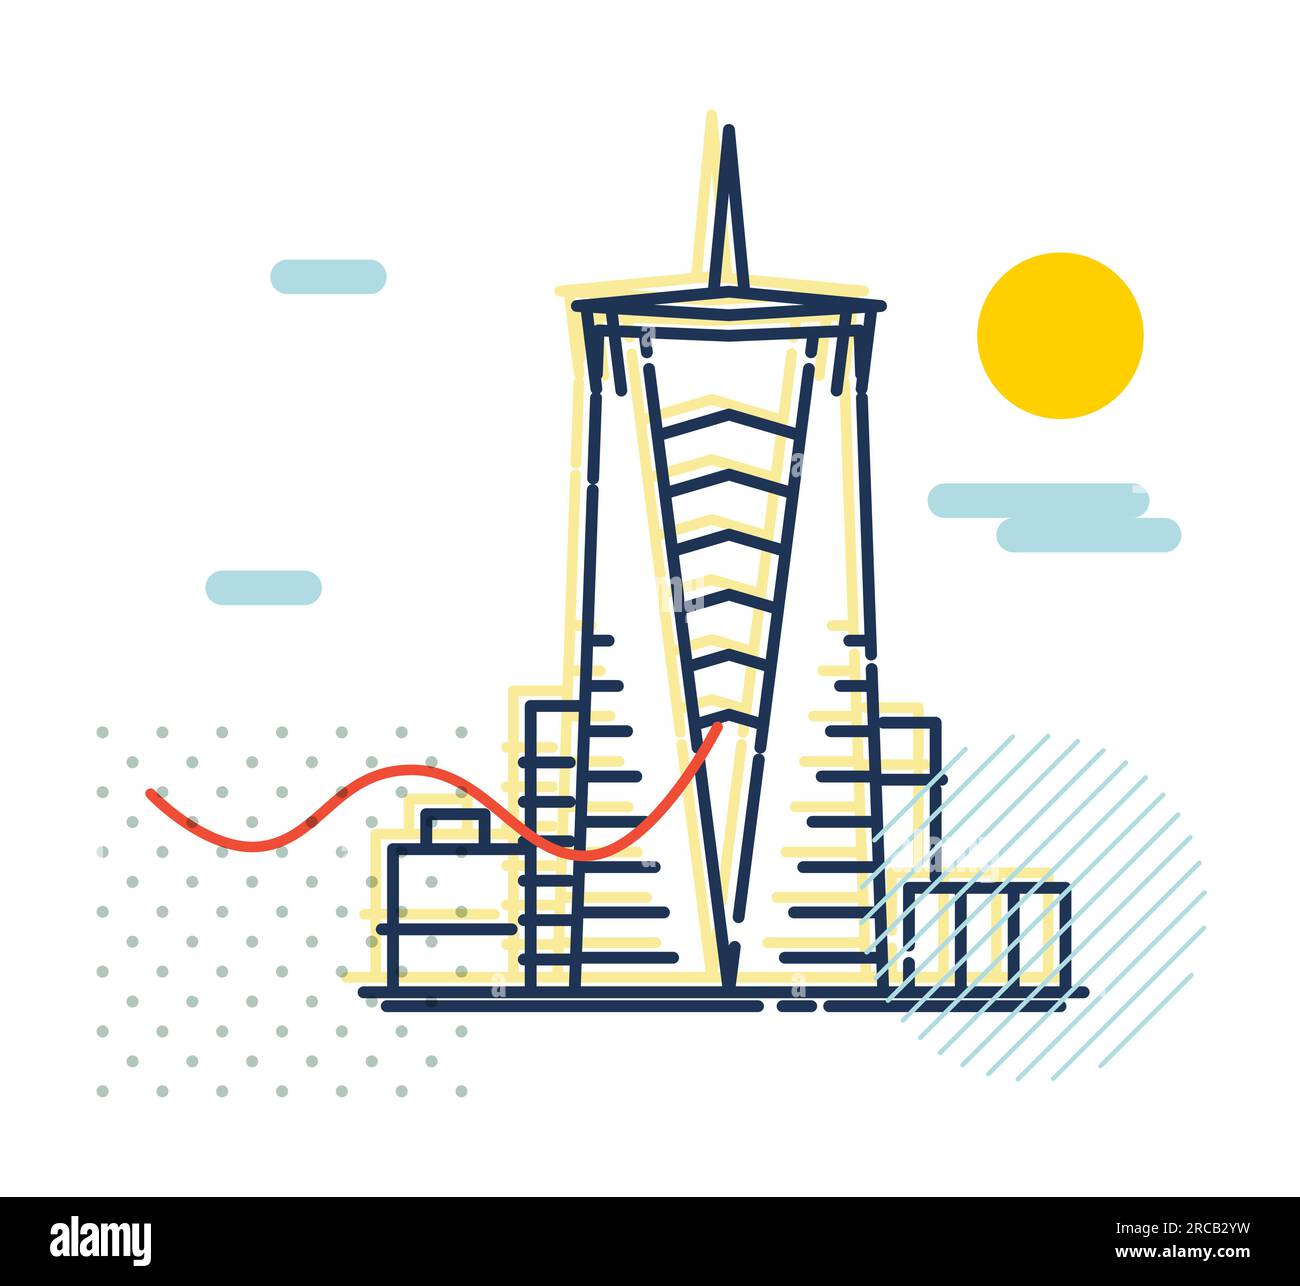 Gurgaon City Icon - Modern Building- Icon Illustration as EPS 10 File Stock Vector